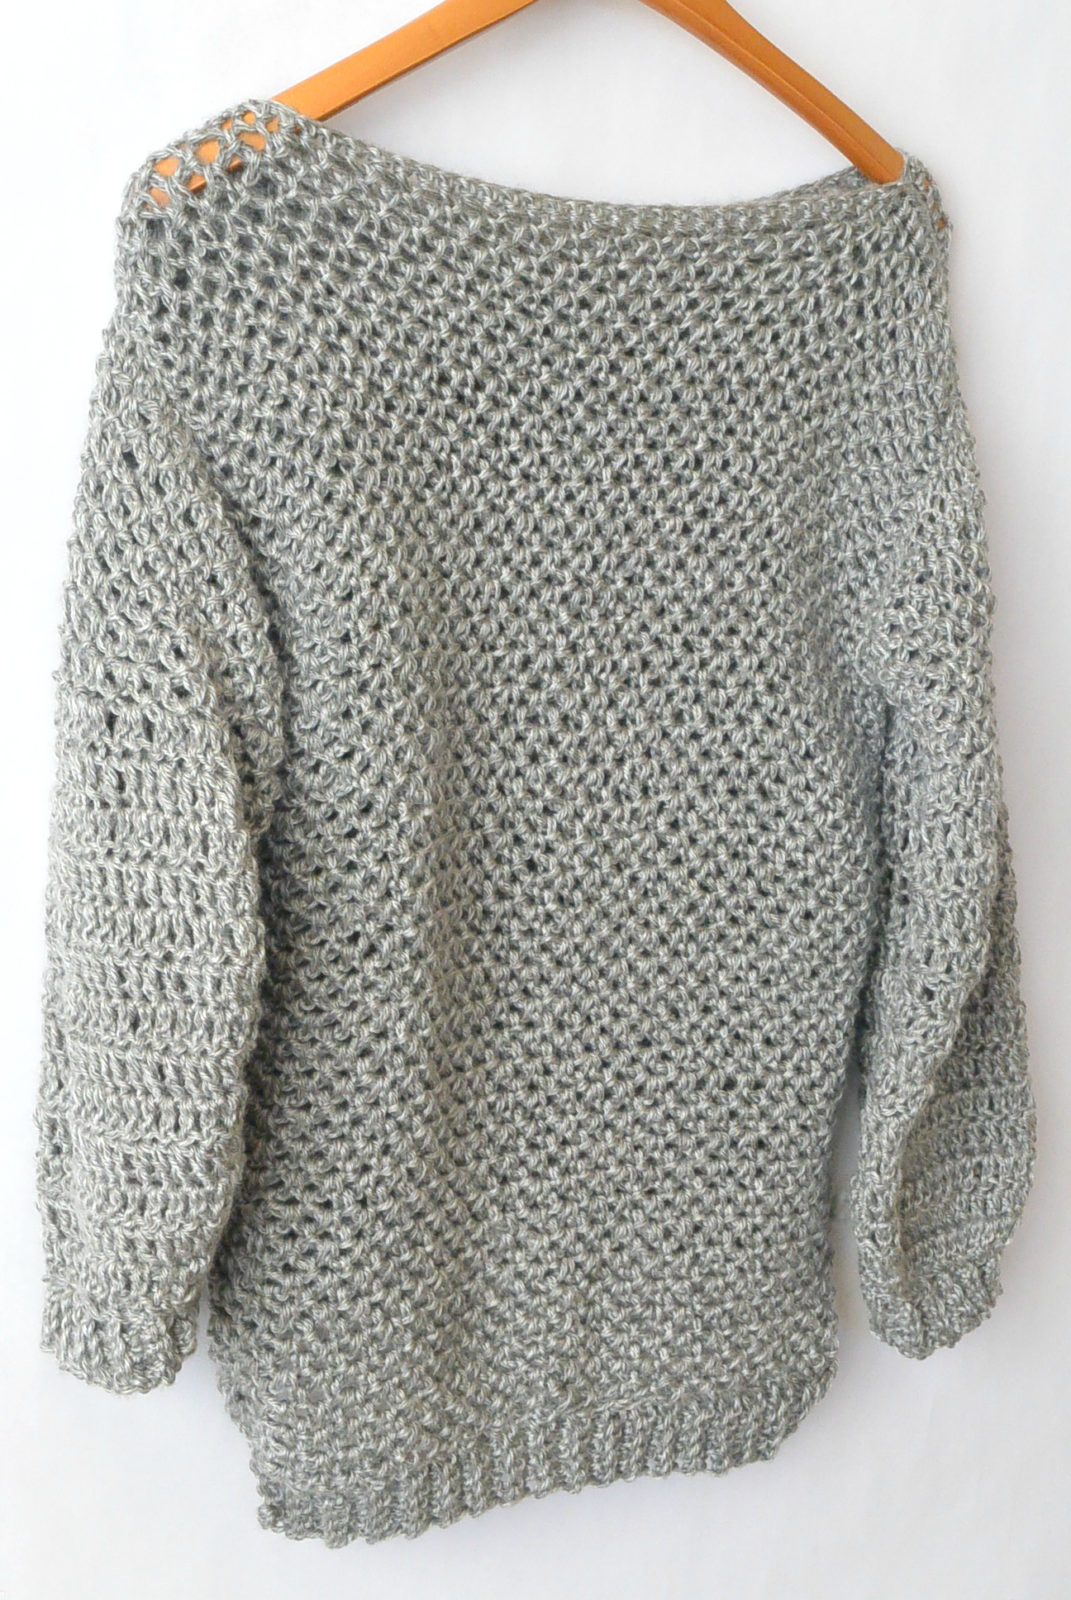 how-to-make-an-easy-crocheted-sweater-knit-like-mama-in-a-stitch